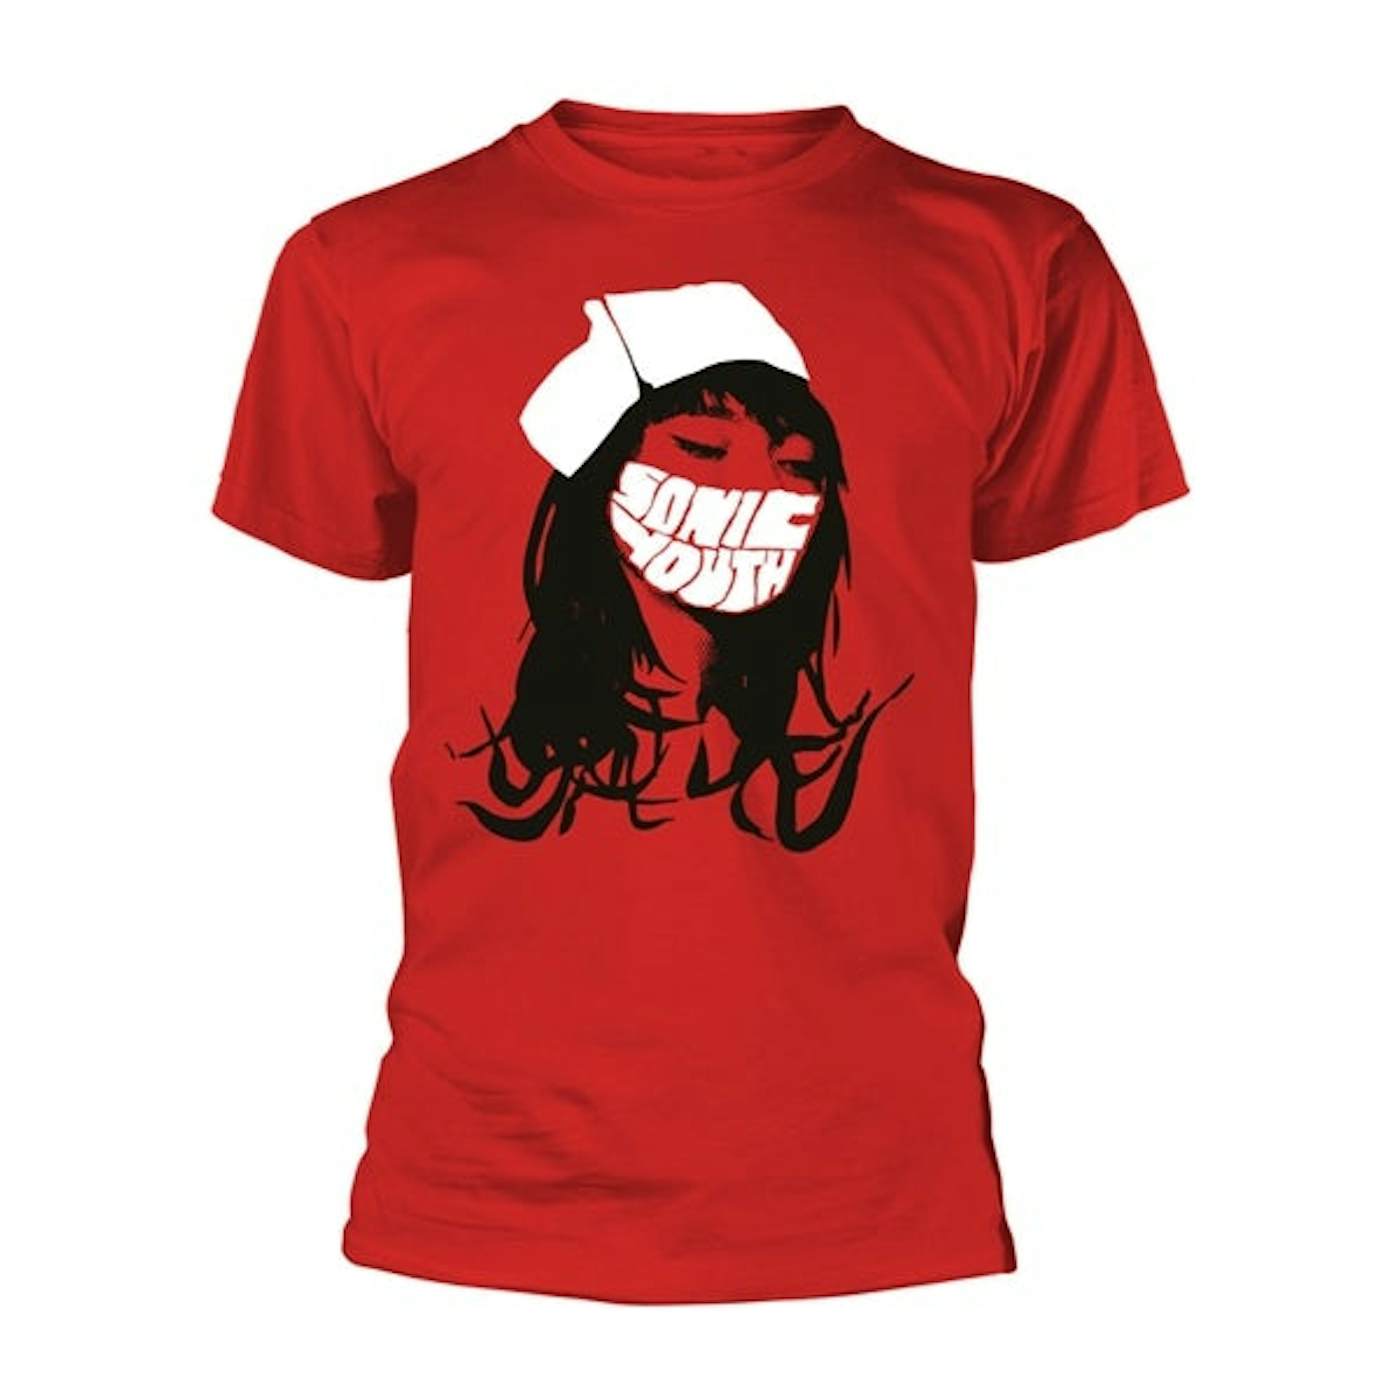 Sonic Youth T-Shirt - Nurse (Red)